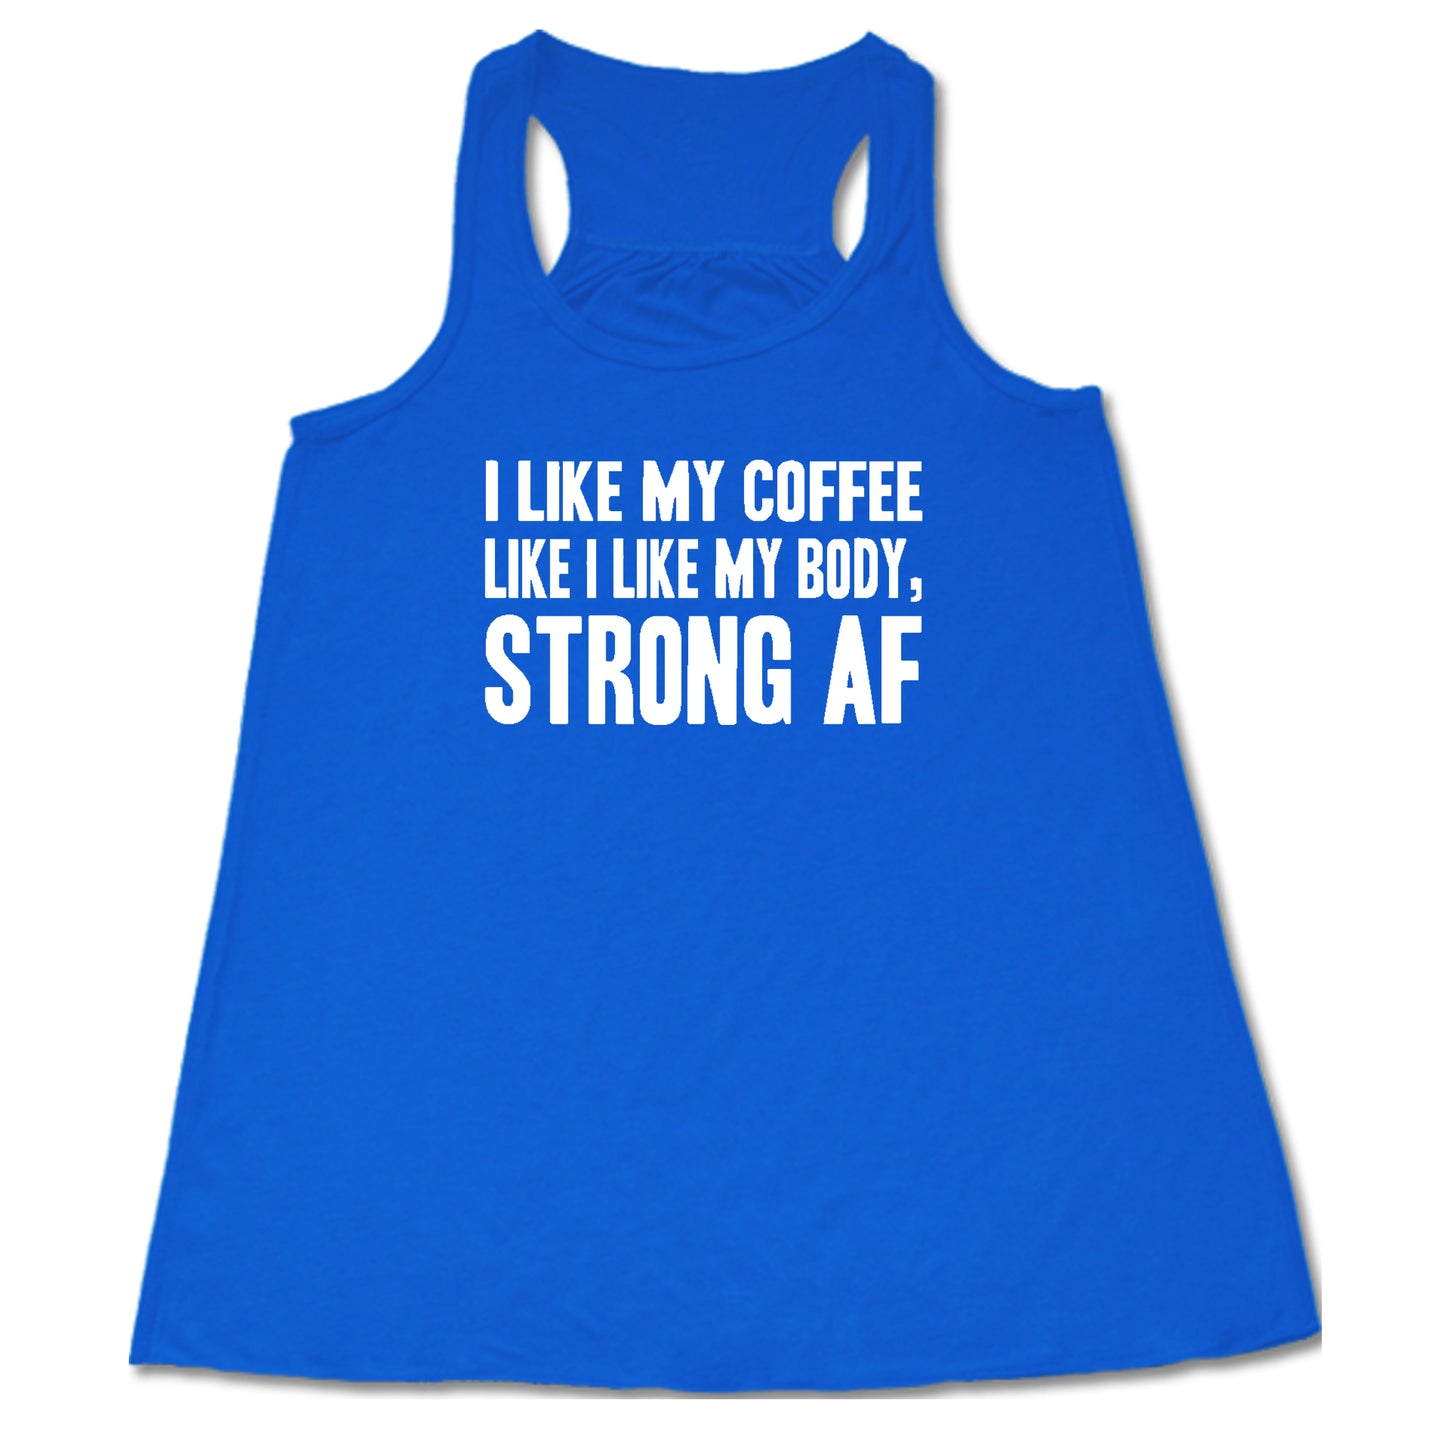 "I Like My Coffee Like I Like My Body Strong AF" quote in white lettering on blue racerback shirt